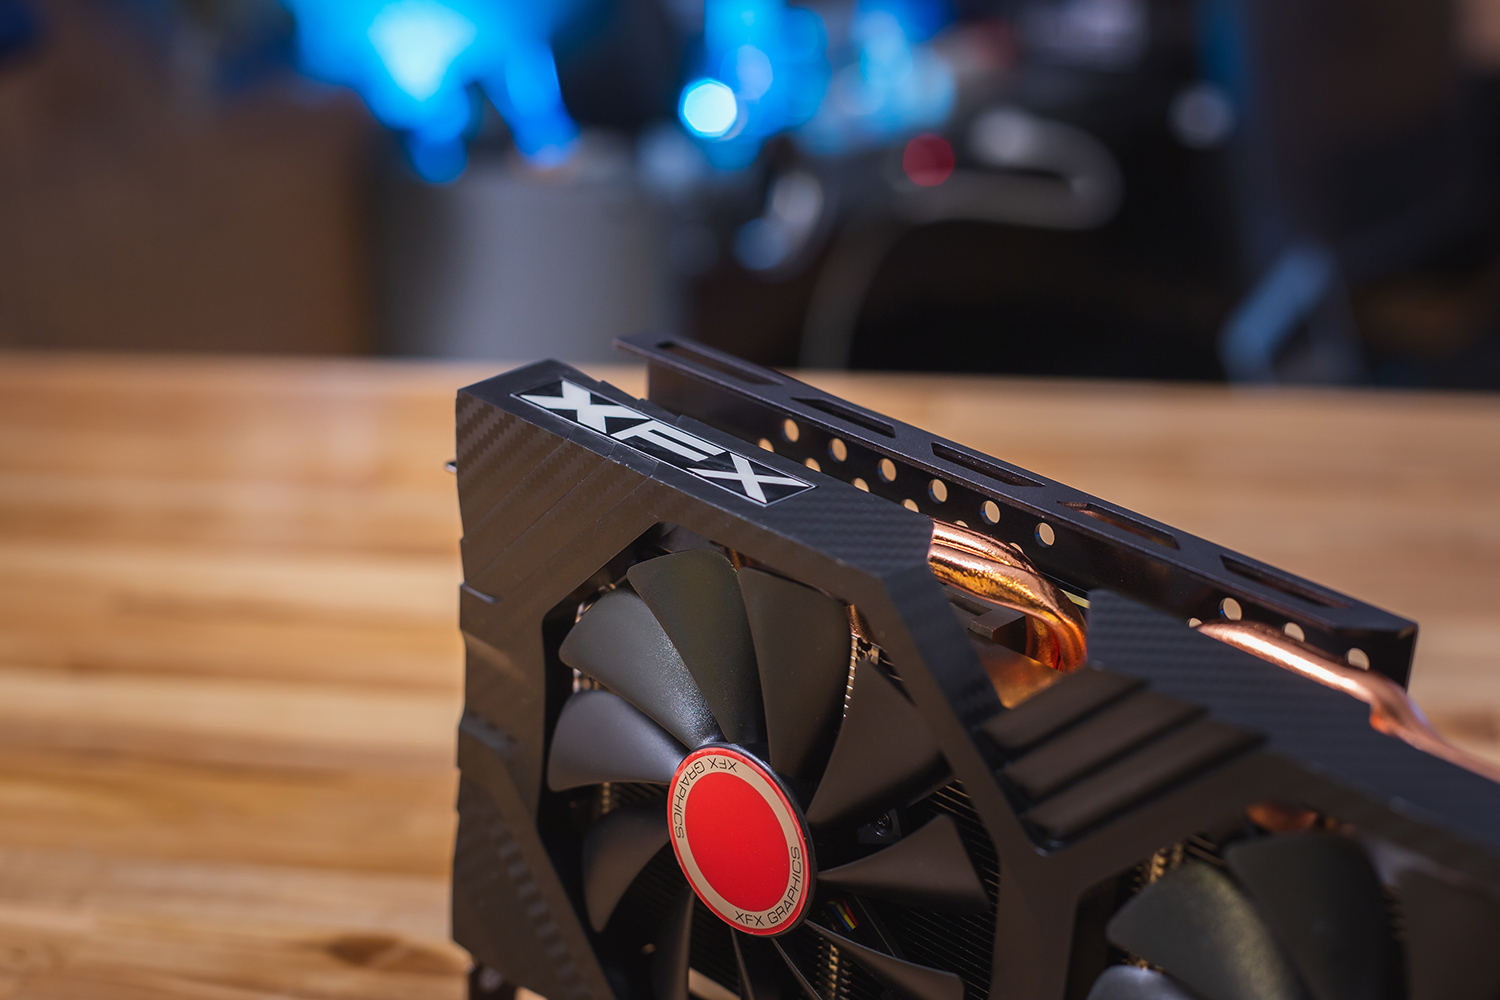 AMD RX 590 Tested and Benchmarked: Forevermore Digital